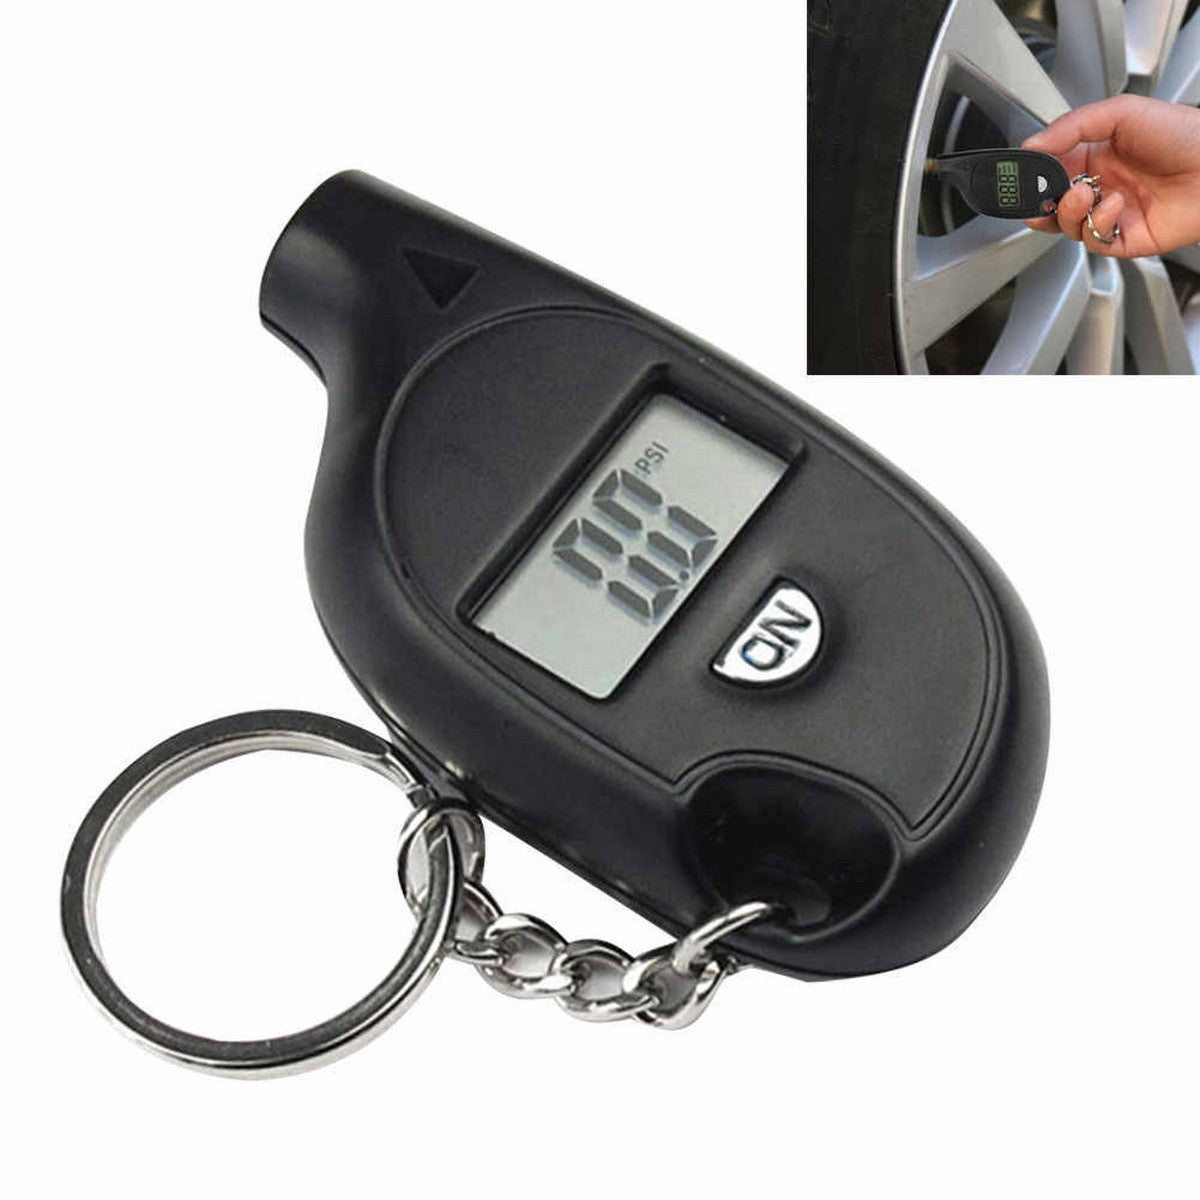 Tire Pressure Gauge Keychain with Display Count